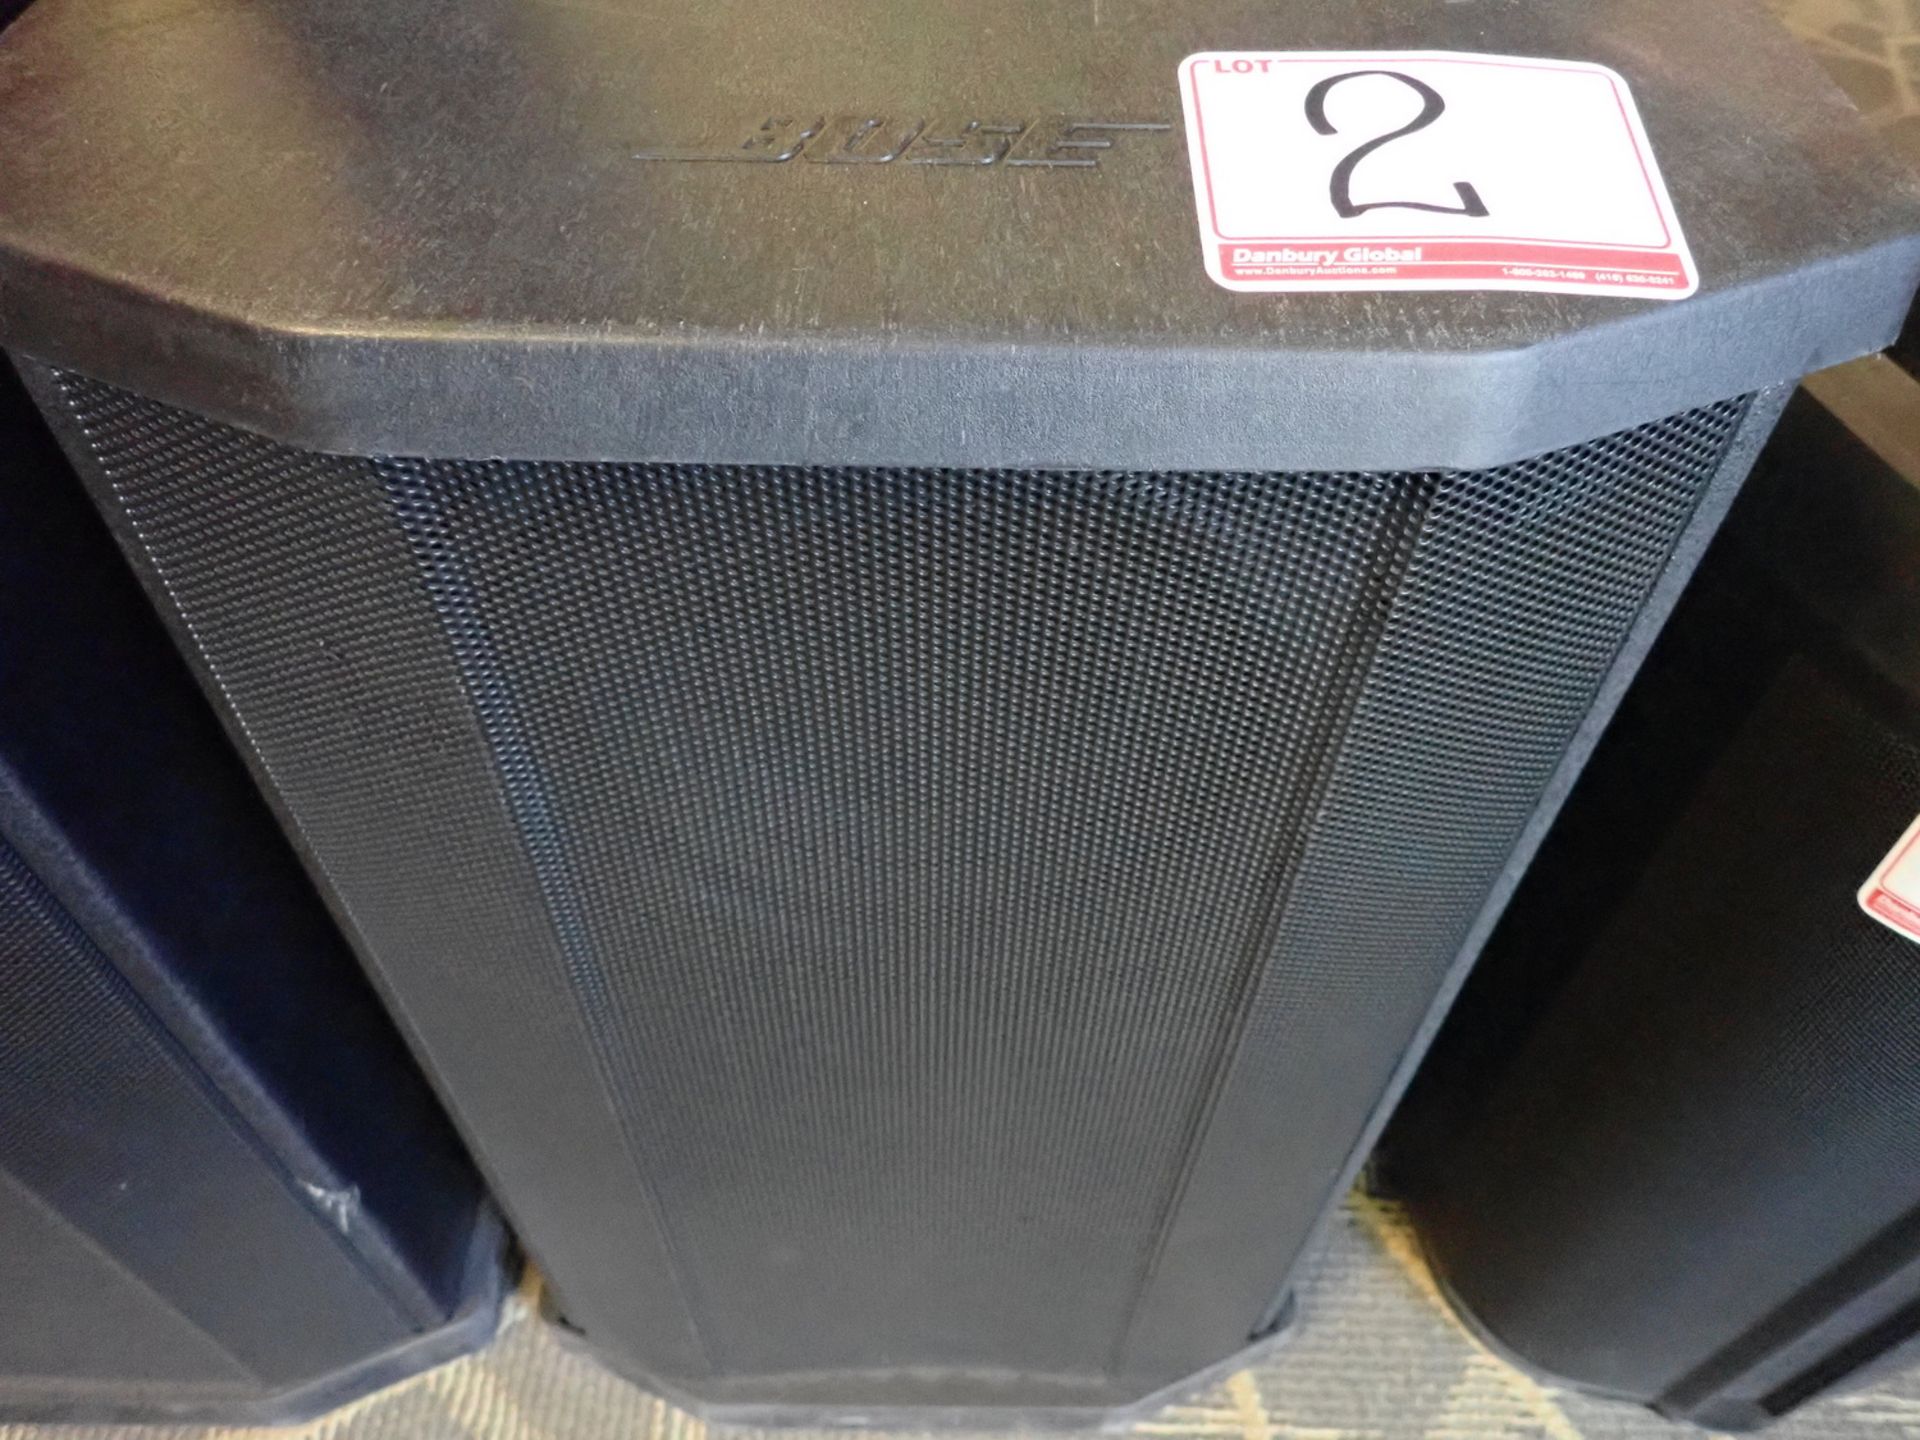 LOT - BOSE F1 812 FLEXIBLE ARRAY C/W F1 SUBWOOFER, STAND, & TRAVEL SOFT CASE - Image 3 of 3